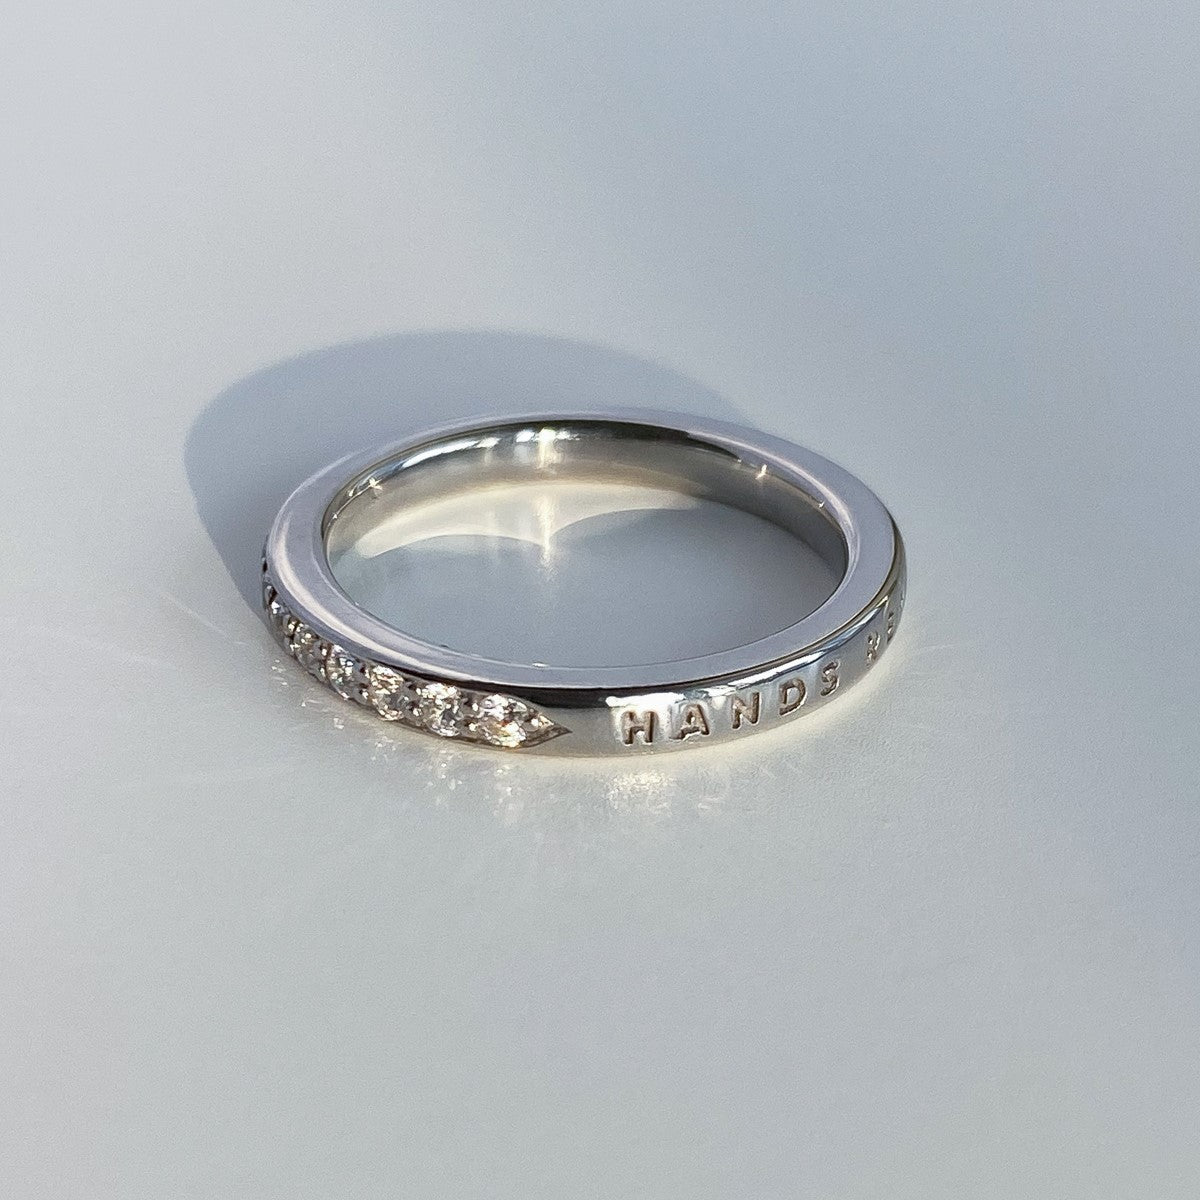 RING "MEMORIES" WITH A HALF CIRCLE OF MOISSANITE | SILVER